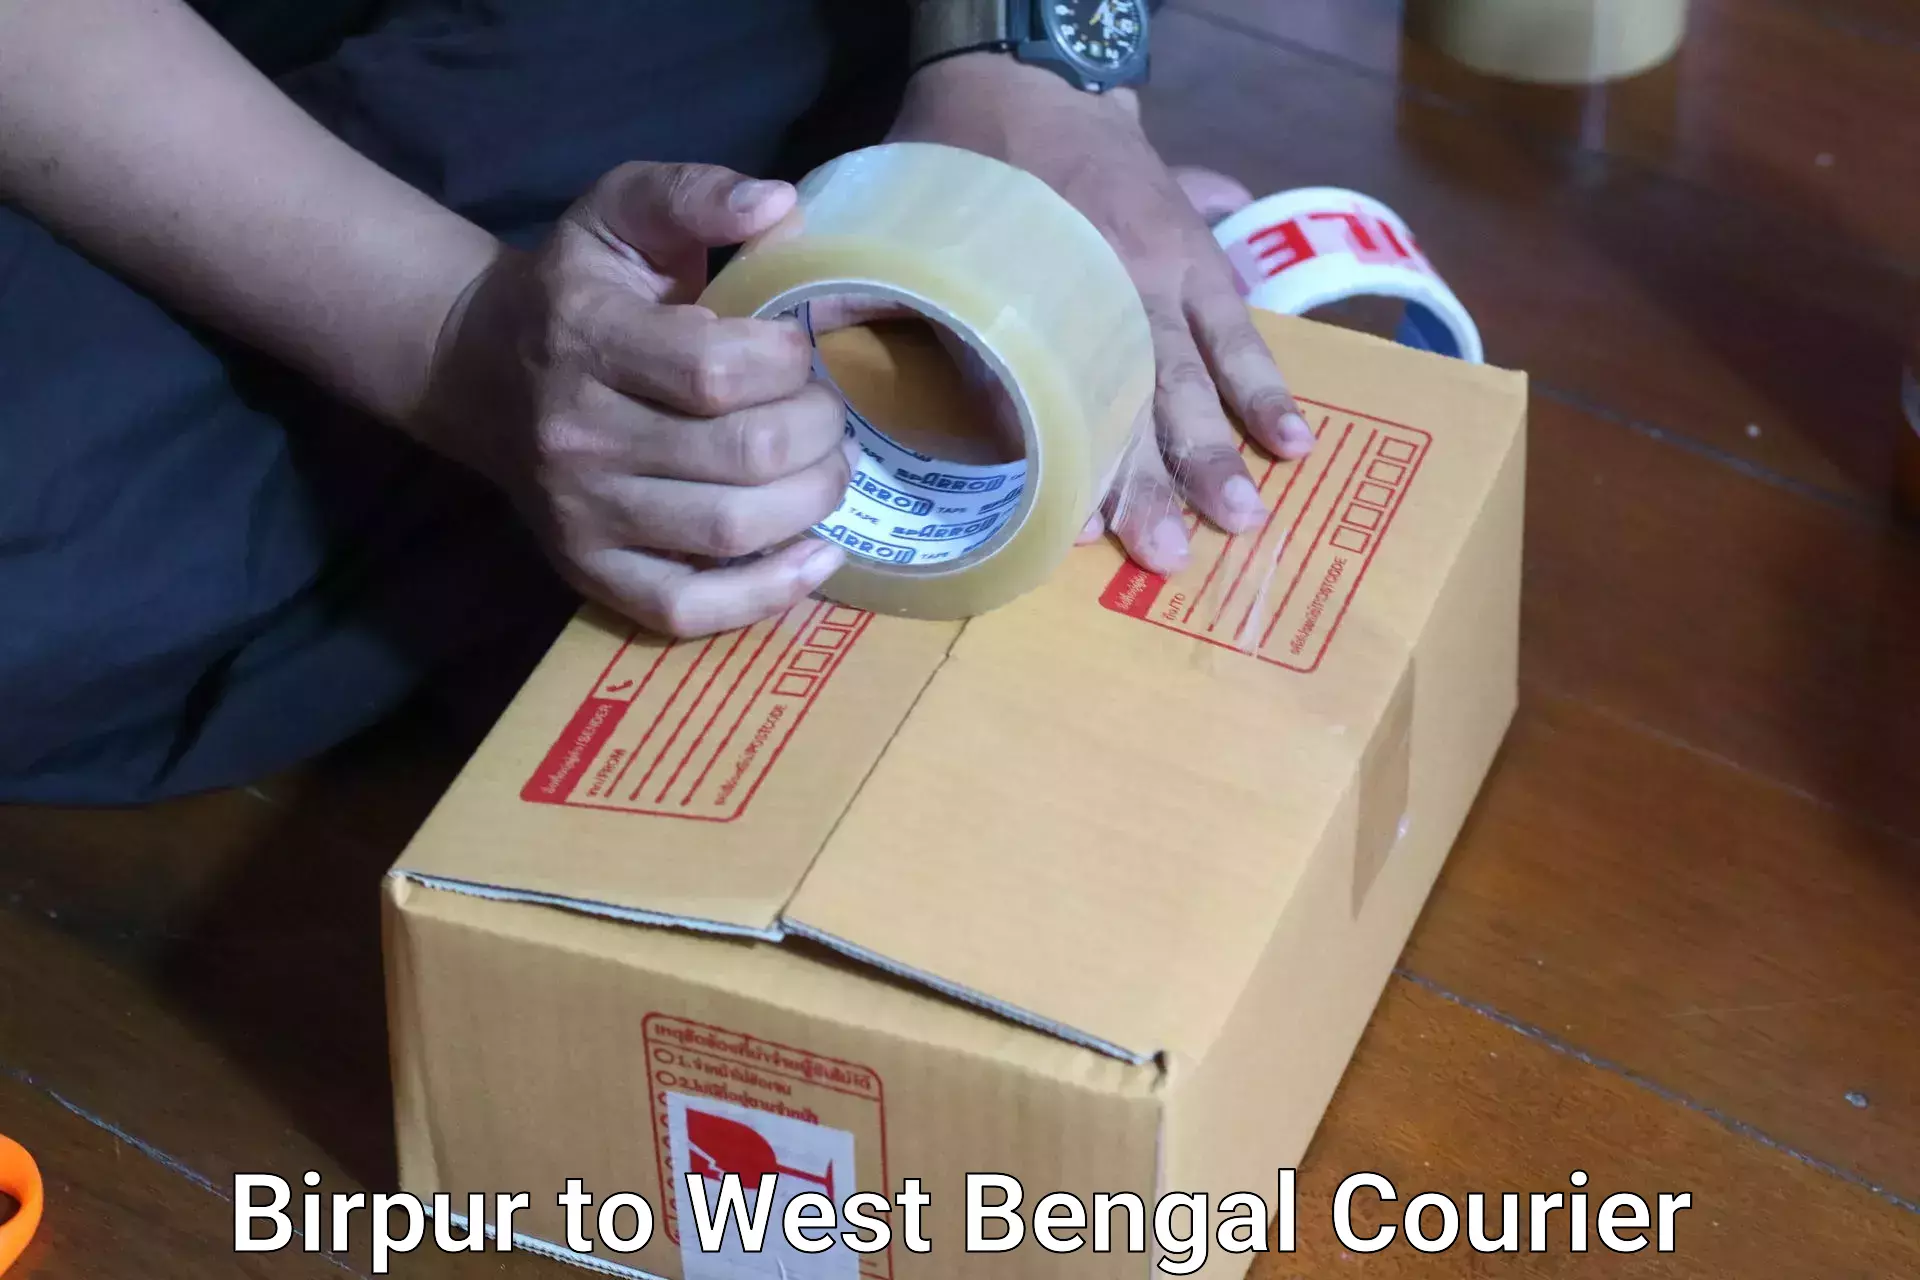 Baggage transport network Birpur to West Bengal